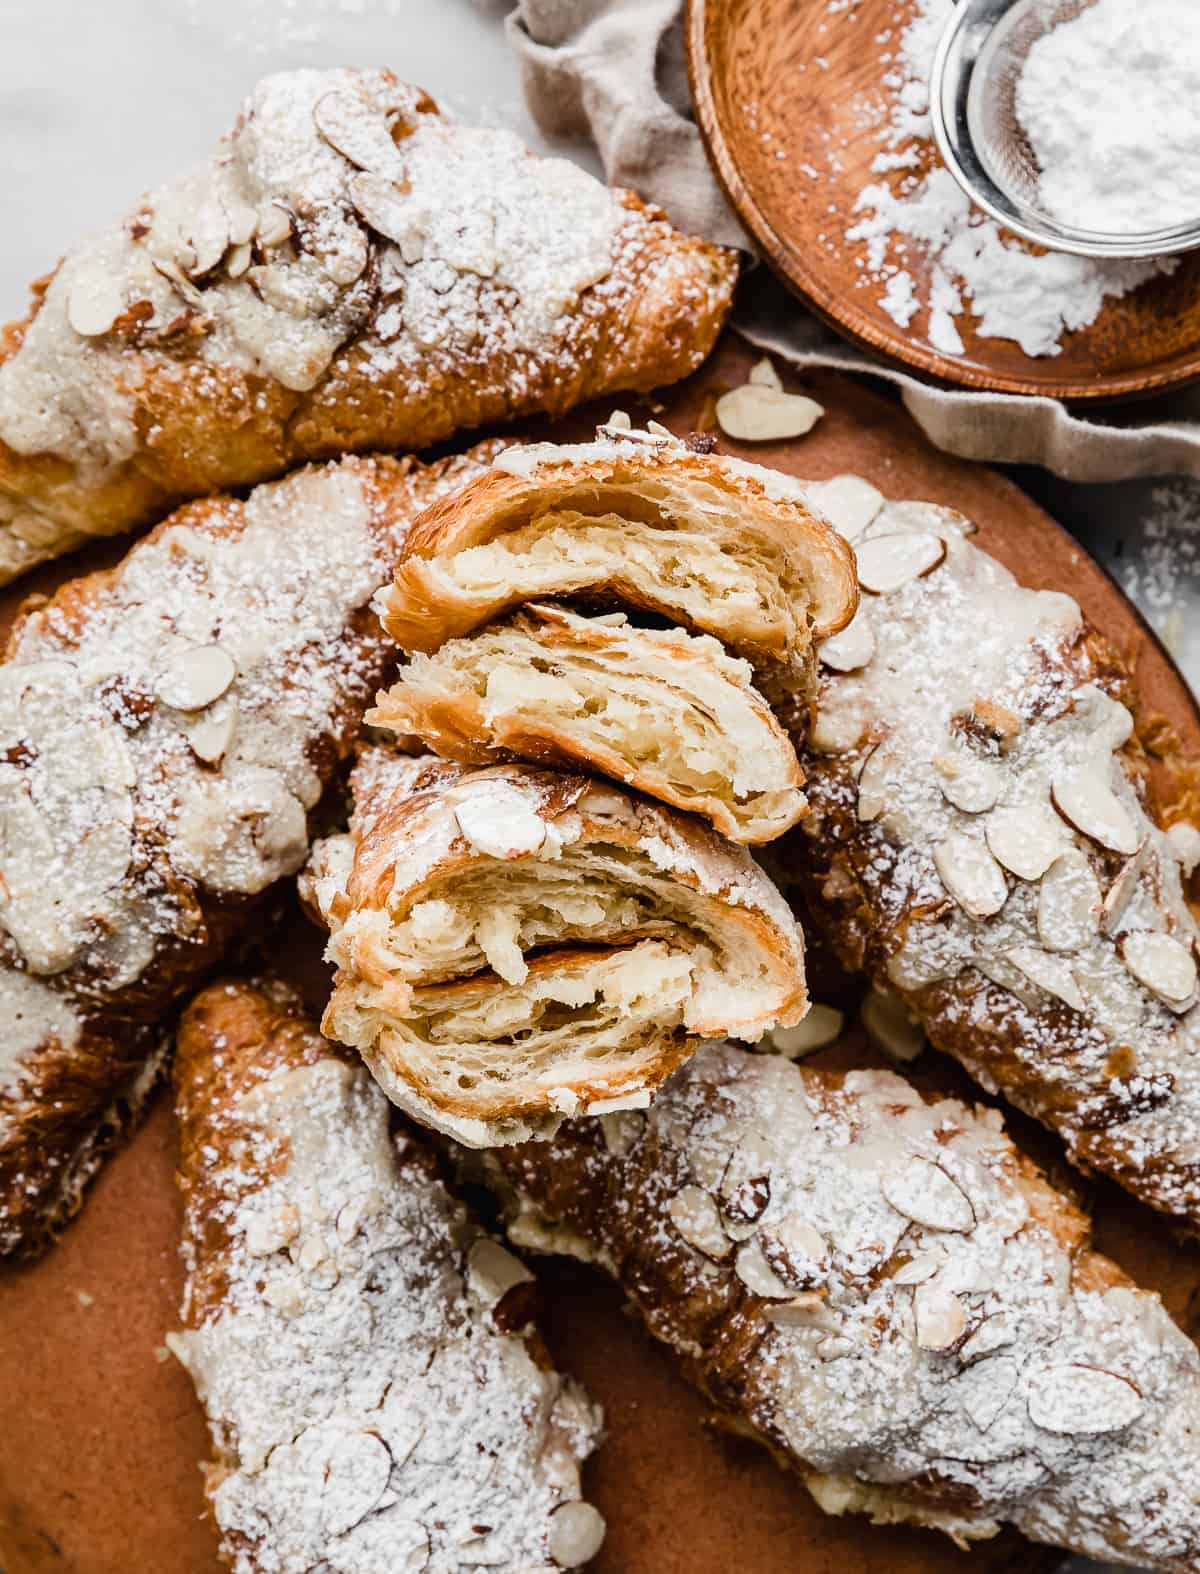 Homemade Almond Croissants split in half and surrounded by additional almond croissants on a brown plate.